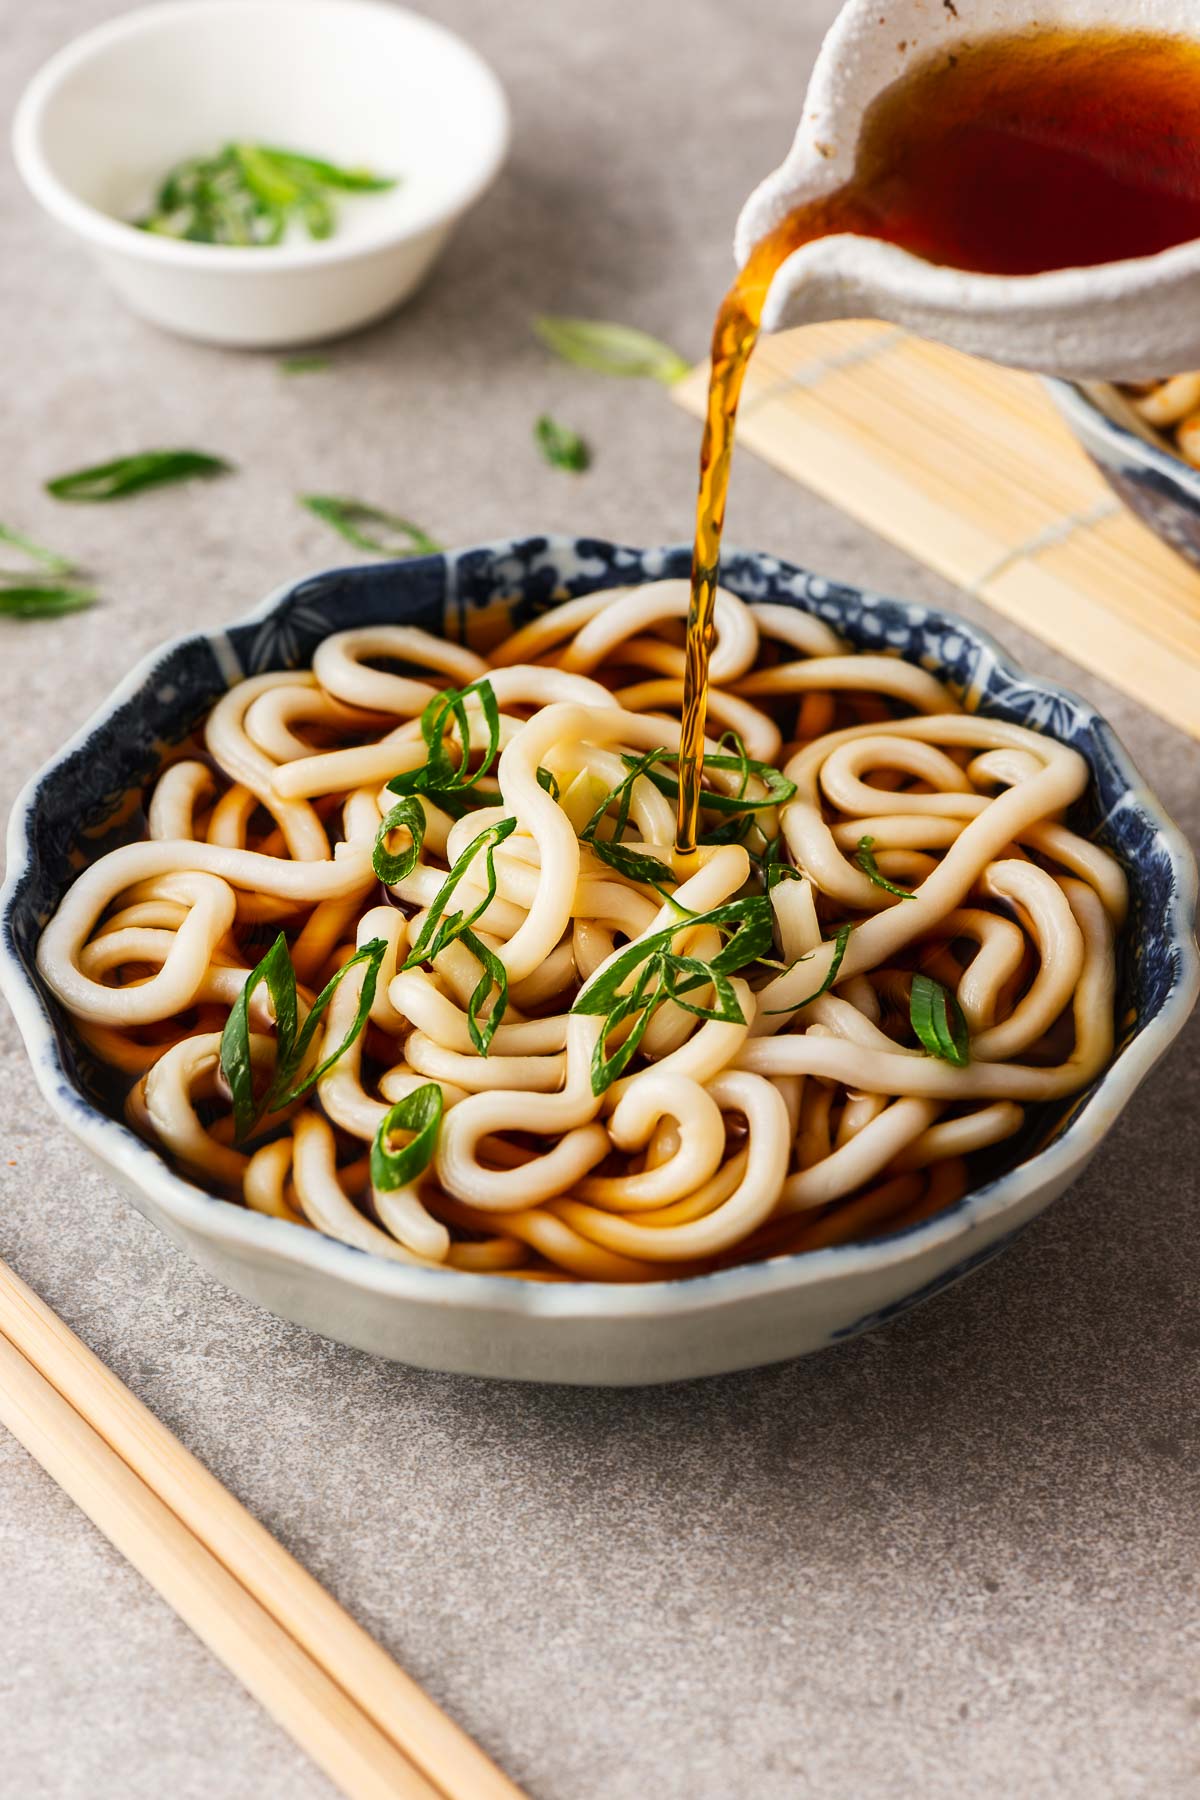 Pouring kake udon noodle broth over a Japanese bowl with udon noodles.